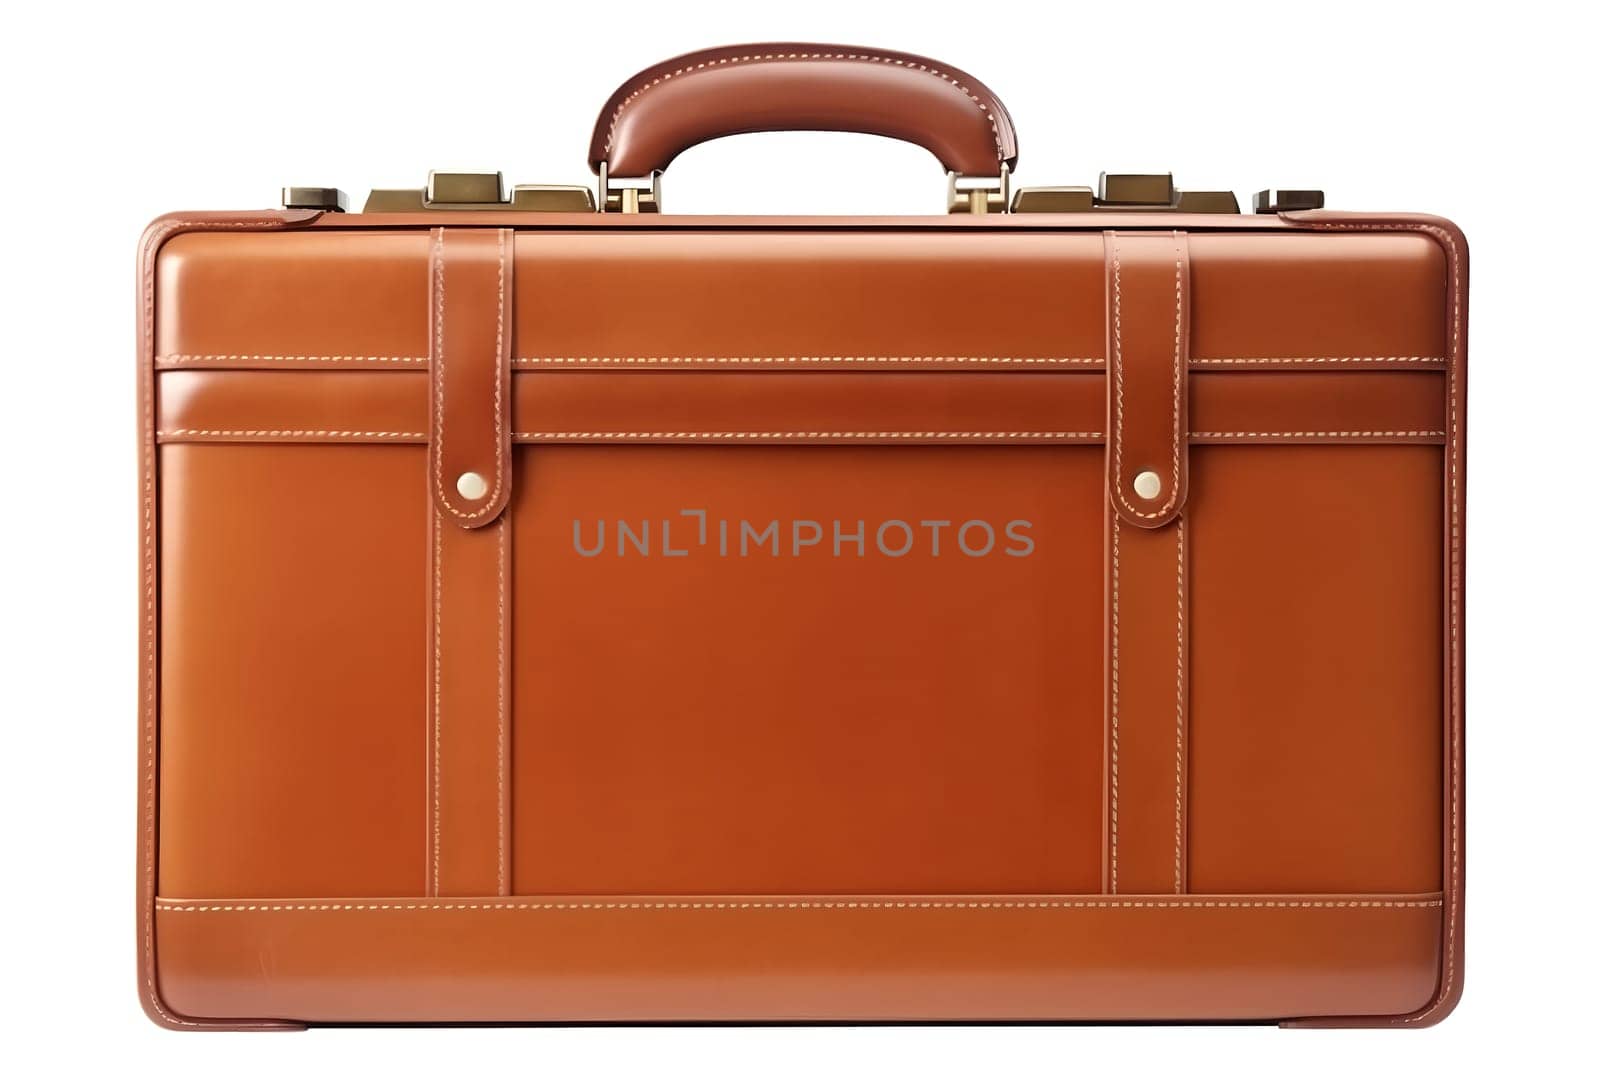 brown leather briefcase isolated on white background, front view, neural network generated image by z1b